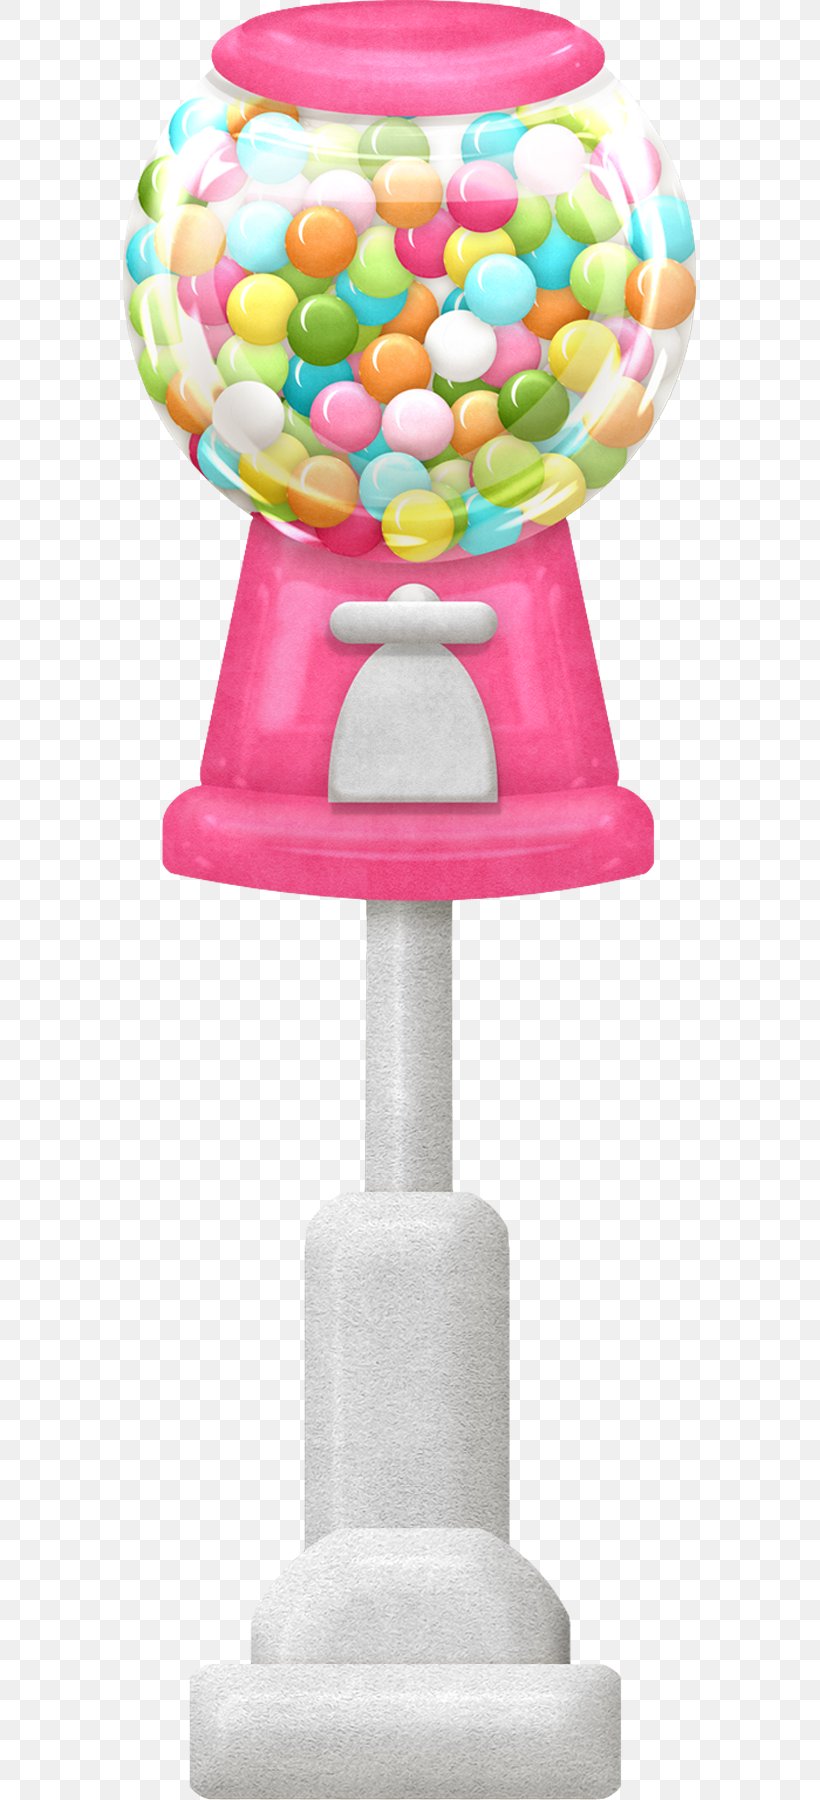 Chewing Gum Gumball Machine Candy Bubble Gum Clip Art, PNG, 573x1800px, Chewing Gum, Bubble Gum, Cake Stand, Candy, Confectionery Download Free